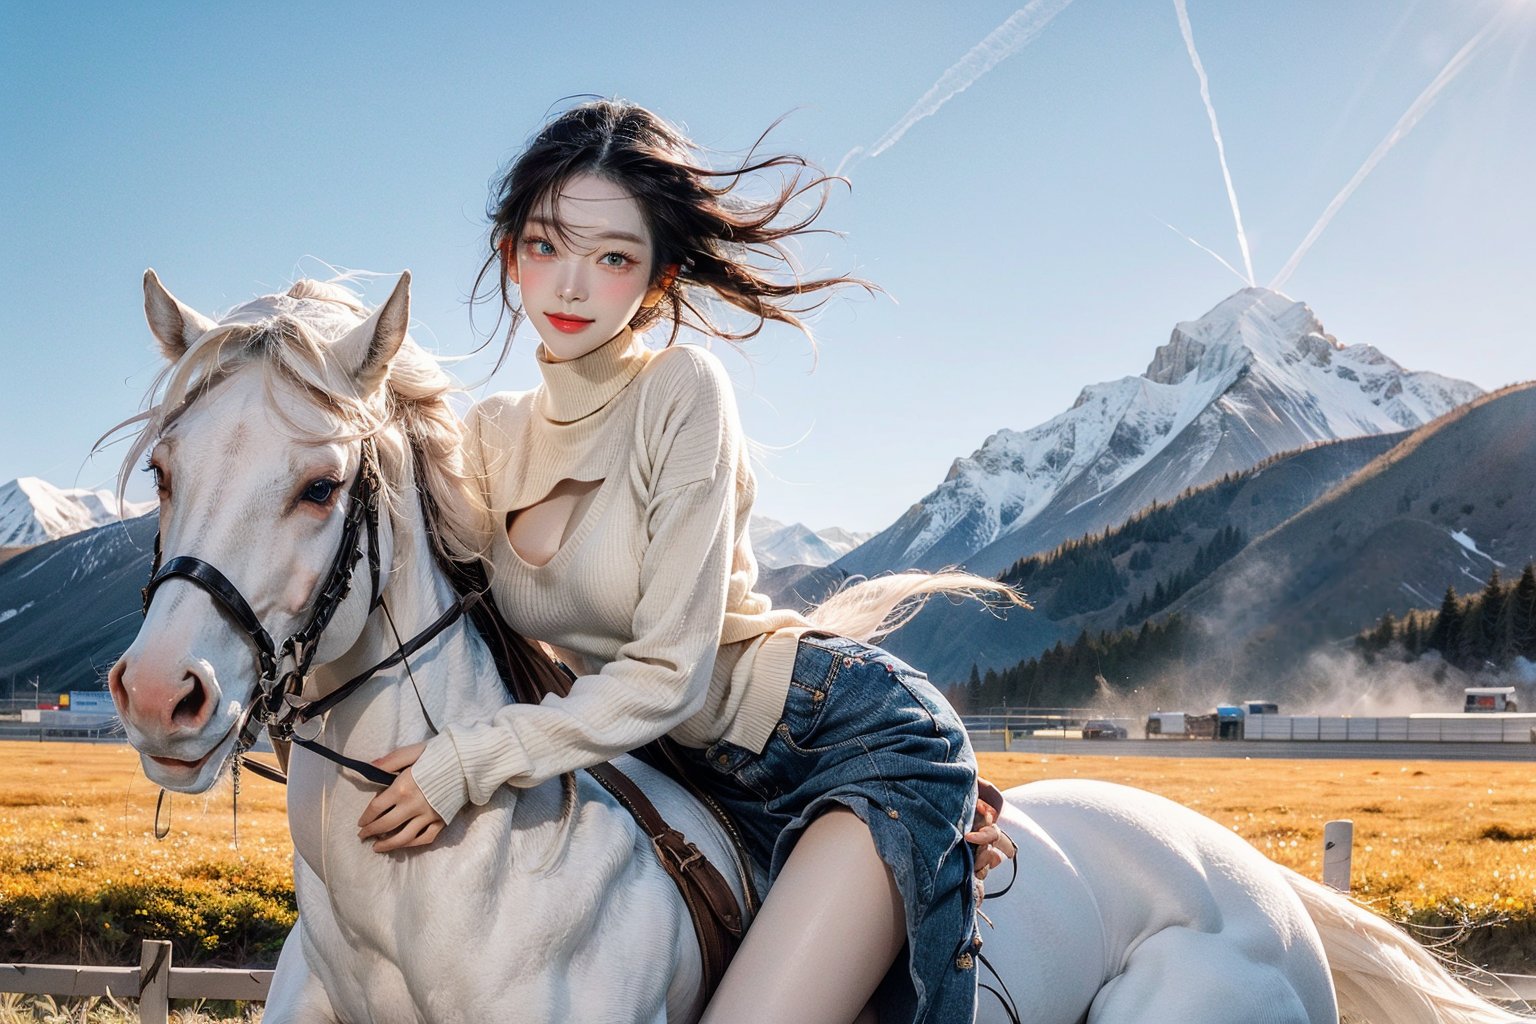 Here's the masterpiece prompt:

Capture a stunning 8K image of Karina, a gorgeous Korean girl, riding a majestic white dragon horse in an eye-level shot against the breathtaking backdrop of Snow-capped mountains and Mongolian grasslands at the lively Mongolian Horse Racing Festival. Her pale skin glows with a subtle blush as she smiles, her eyes rolling with playful abandon behind glowing pupils. Her long, light red hair falls to her waist in a fashionable hairstyle, framing her perfect face with its flawless features. She wears a green Turtleneck sweater that showcases her cleavage and sideboobs, paired with black see-through stockings and no underwear, exuding confidence and beauty. The camera captures the intricate details of her skin texture, detailed hair, and realistic facial expressions.